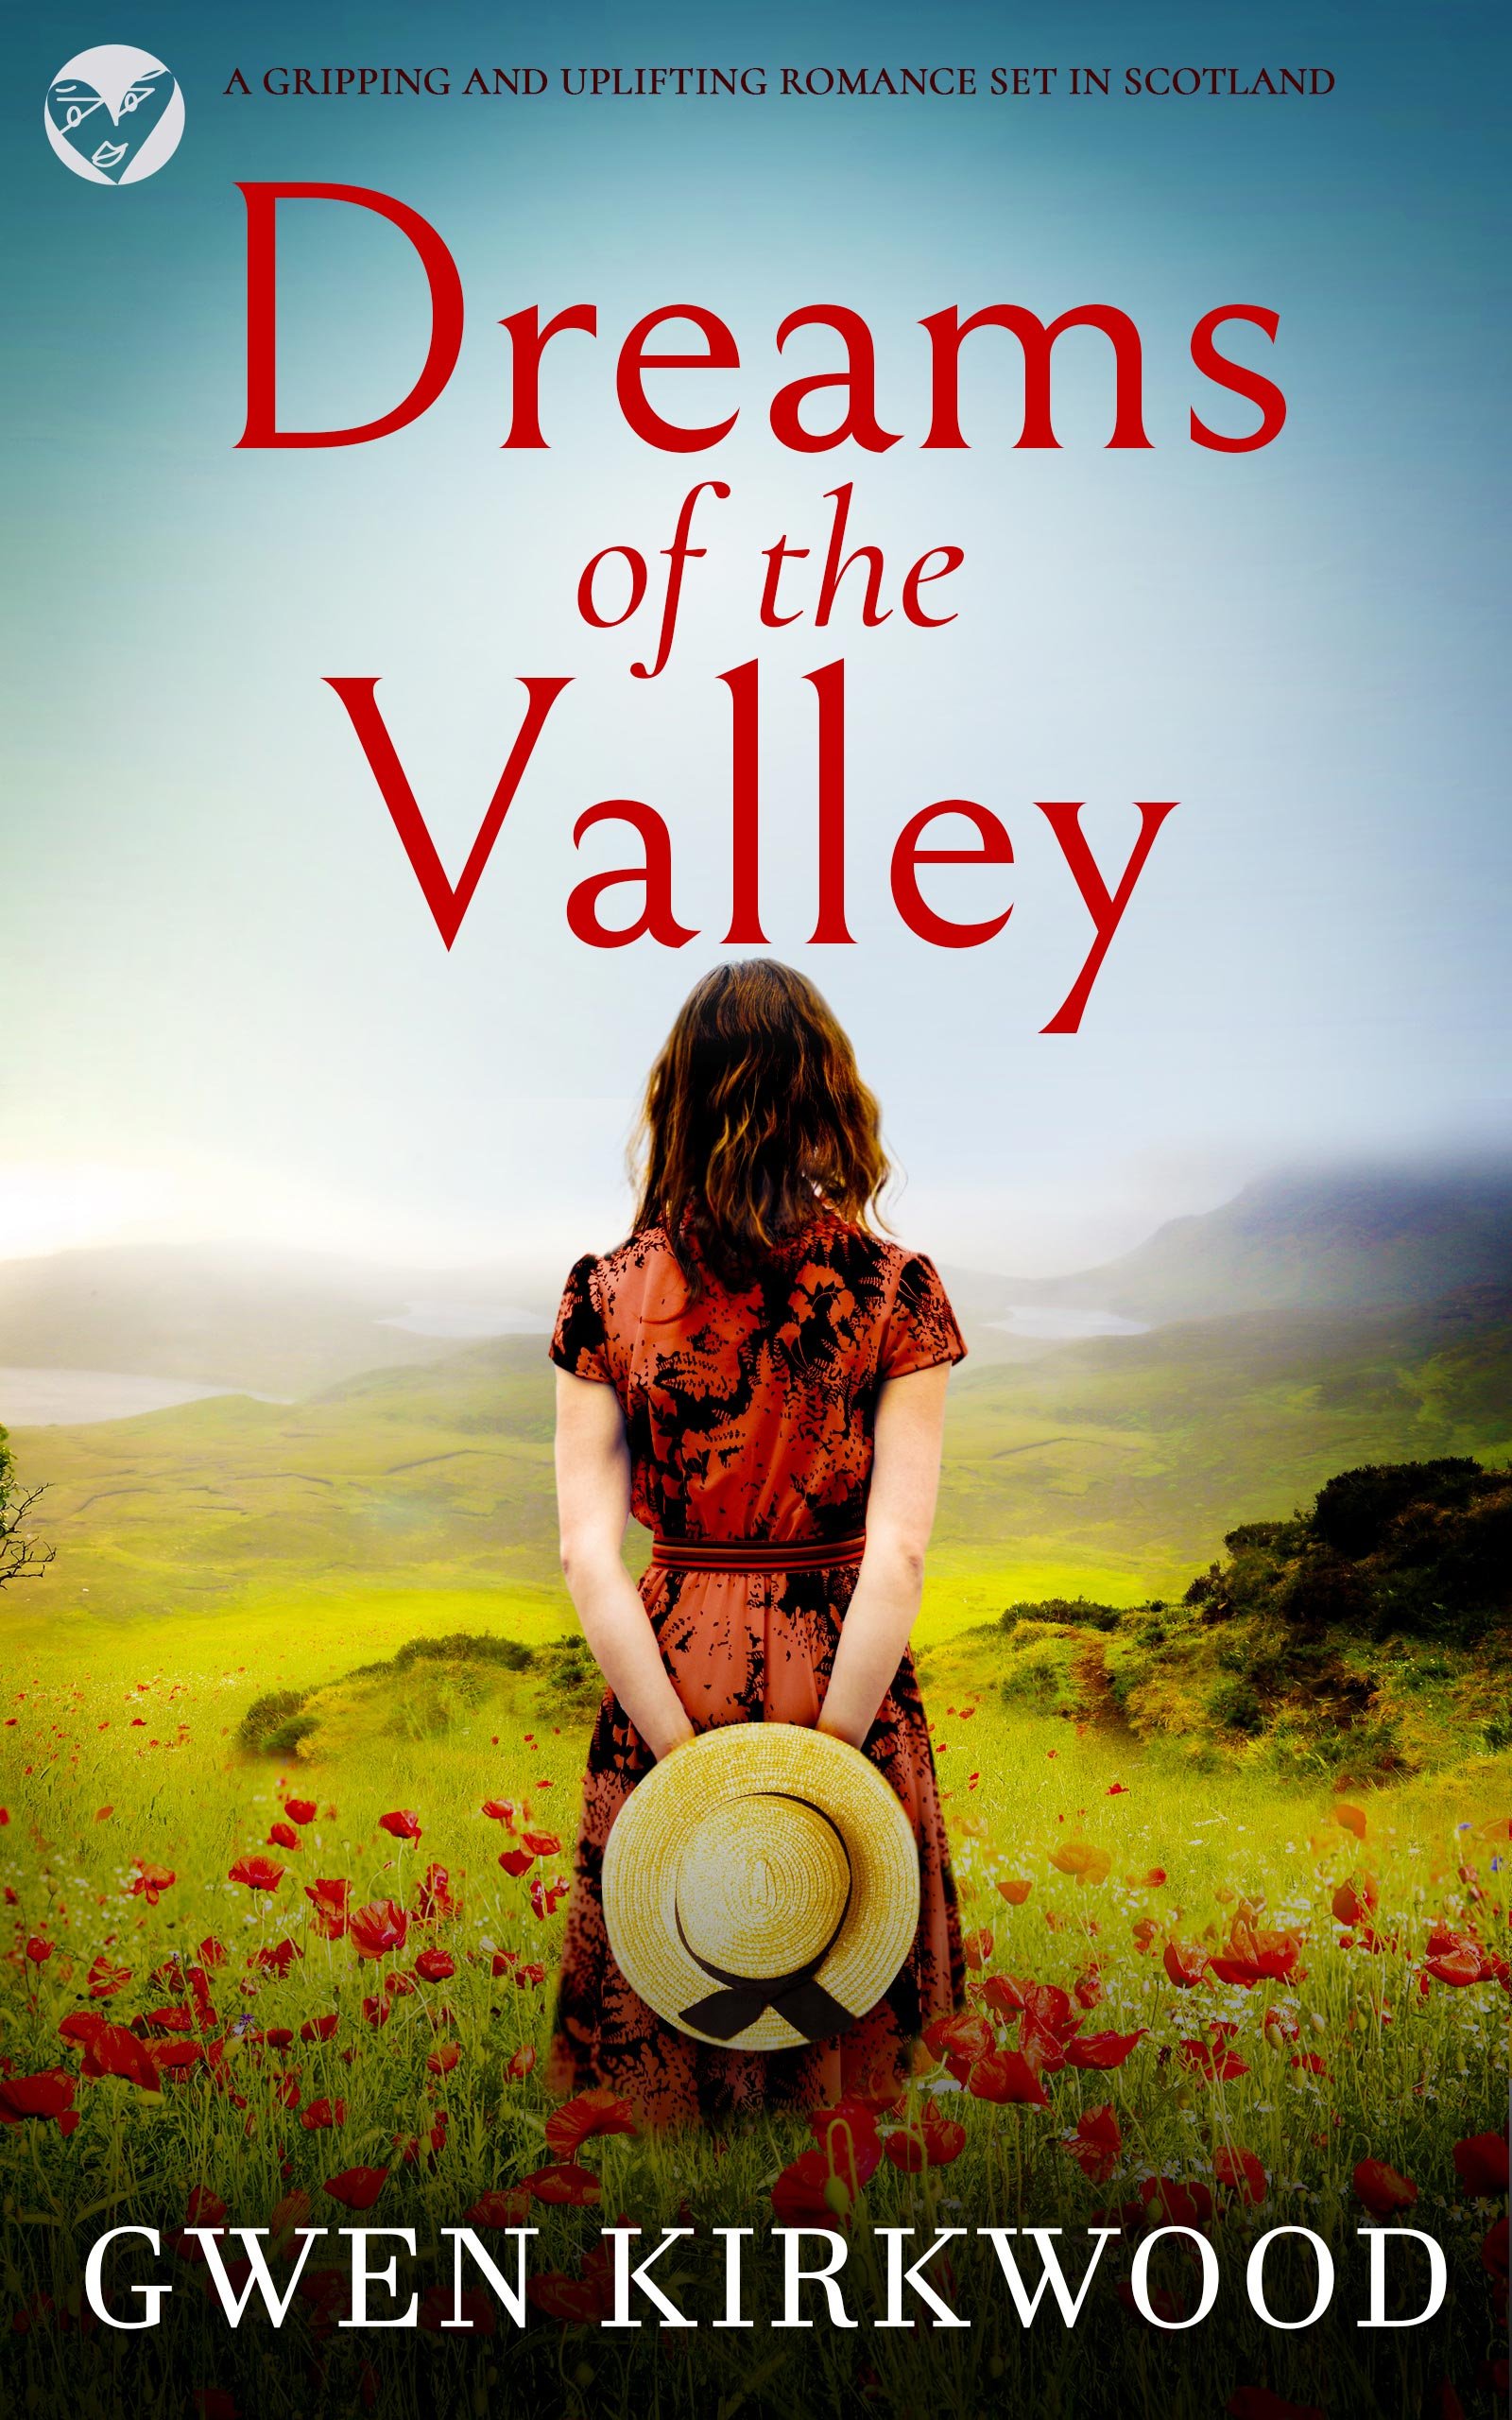 DREAMS OF THE VALLEY 582k Cover PUBLISH.jpg